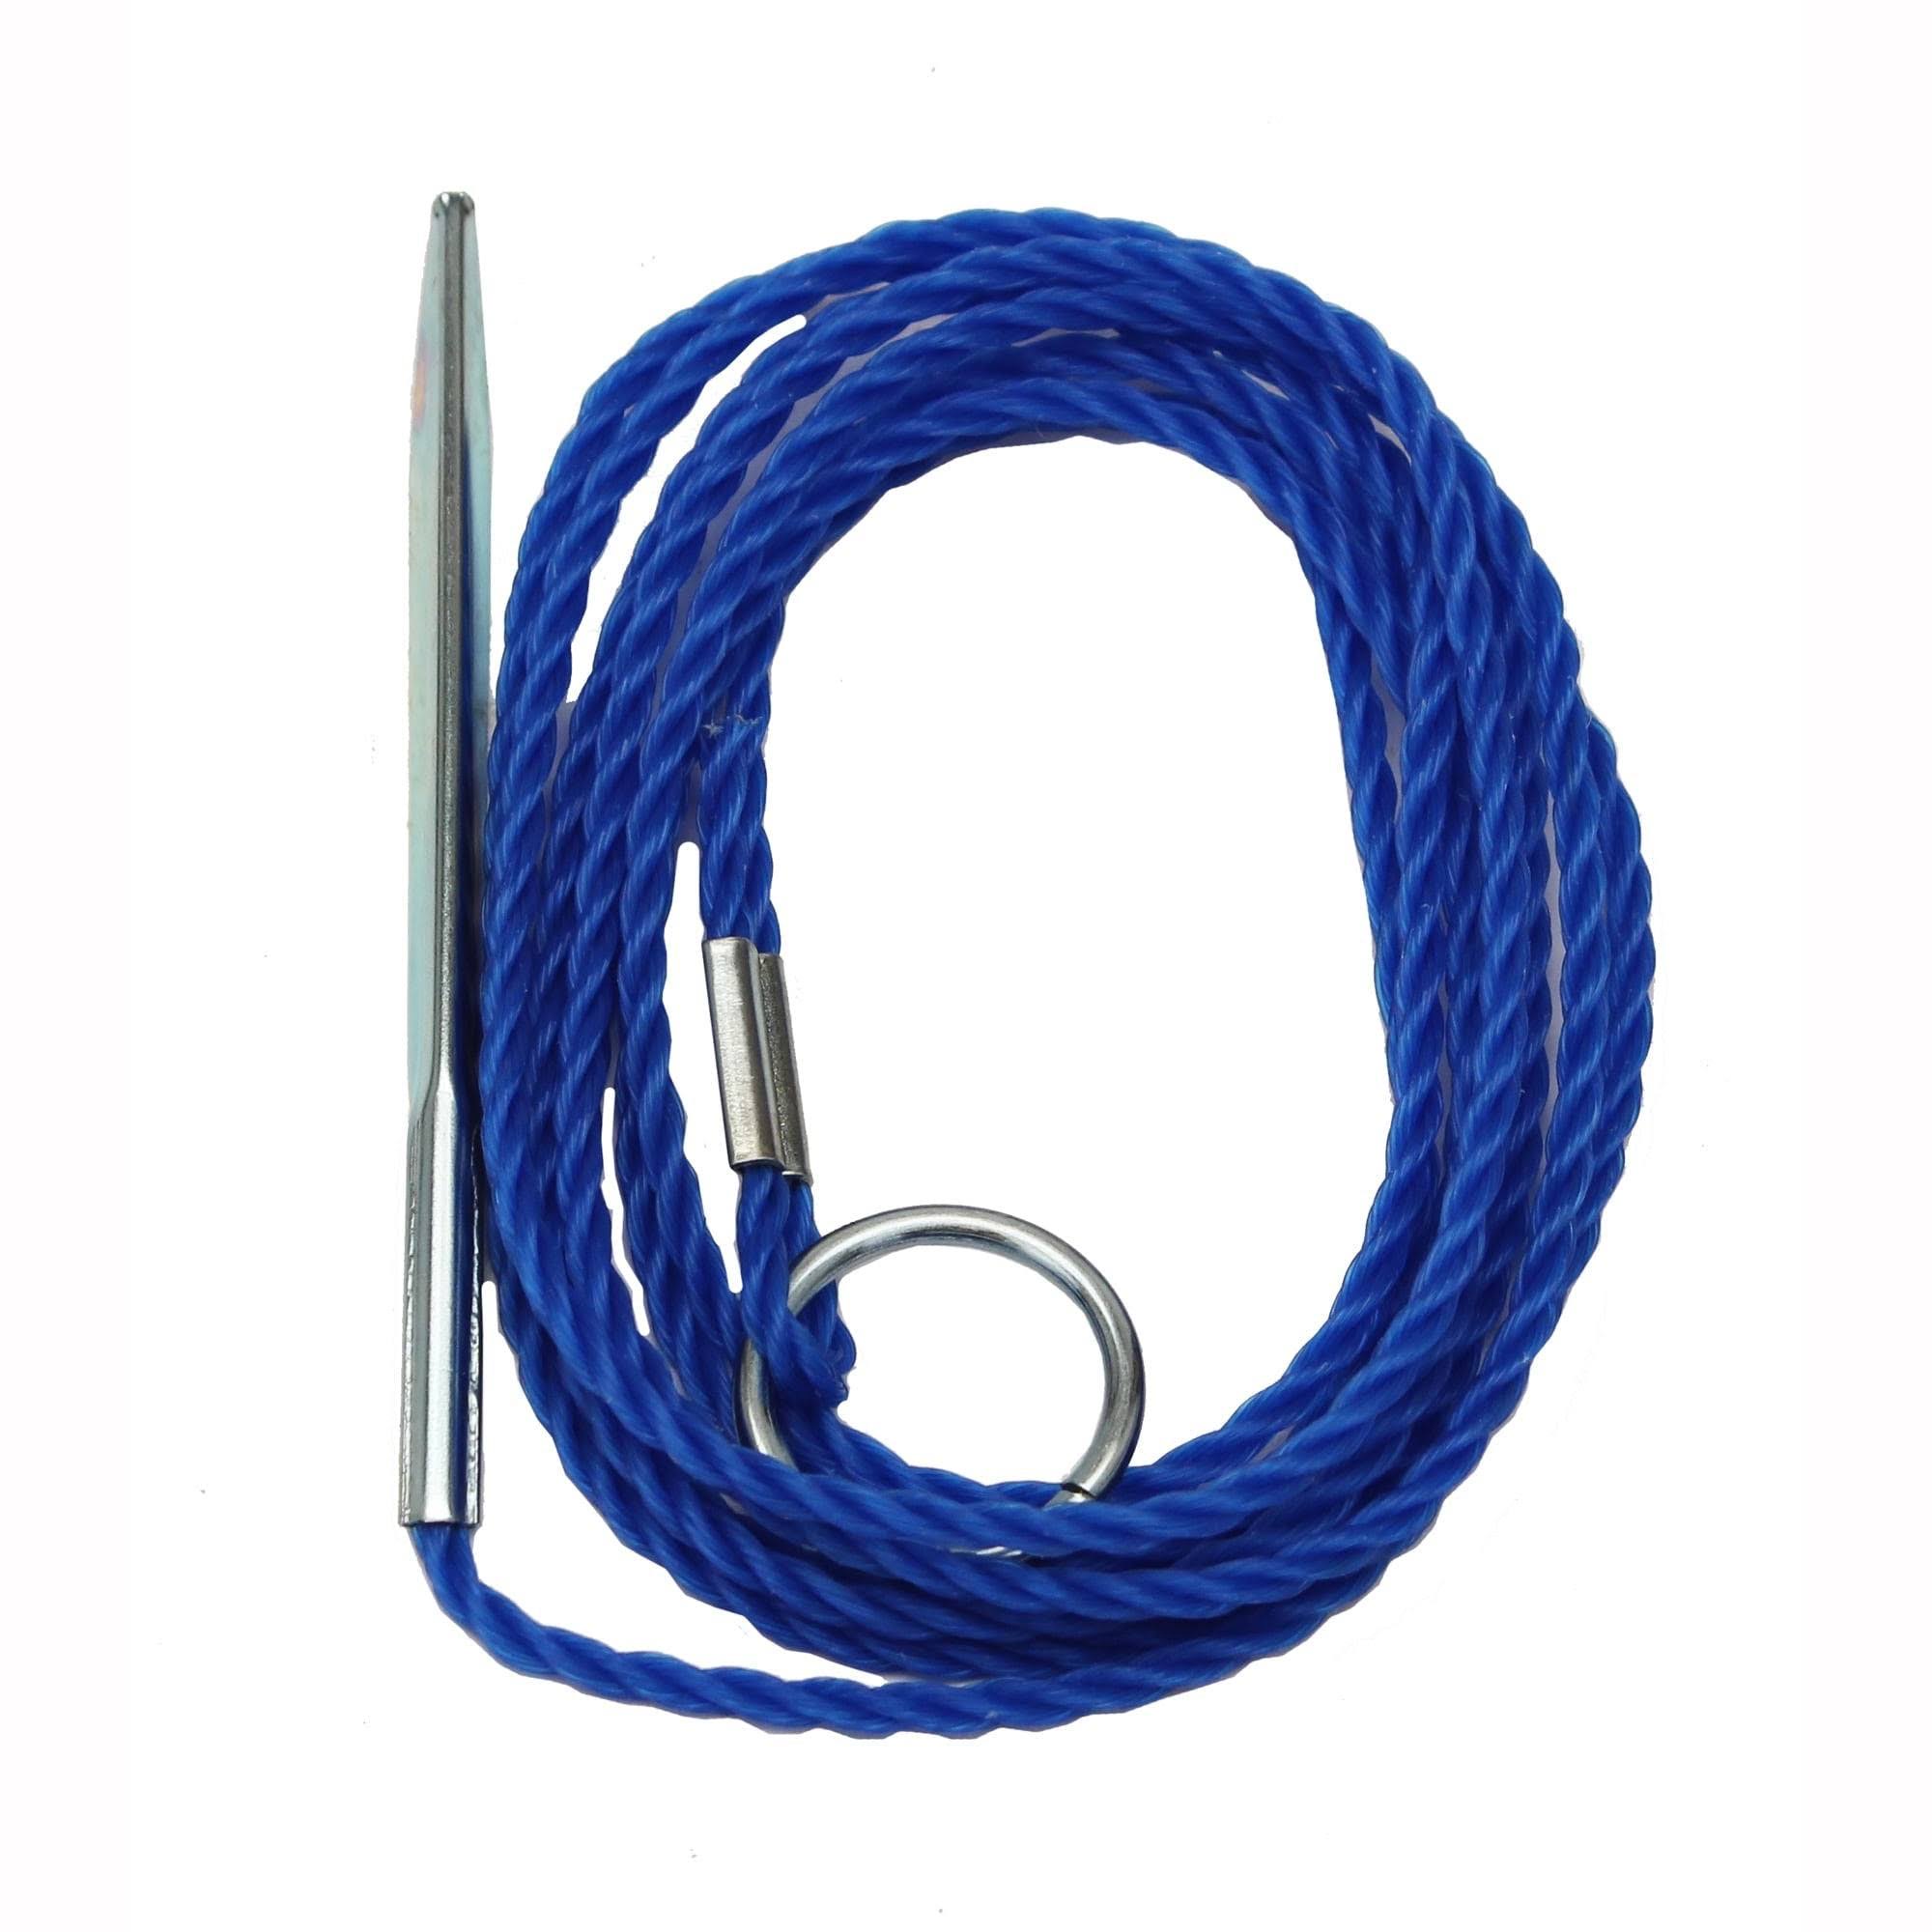 Eagle Claw Poly Fish Stringer - Blue, 6'